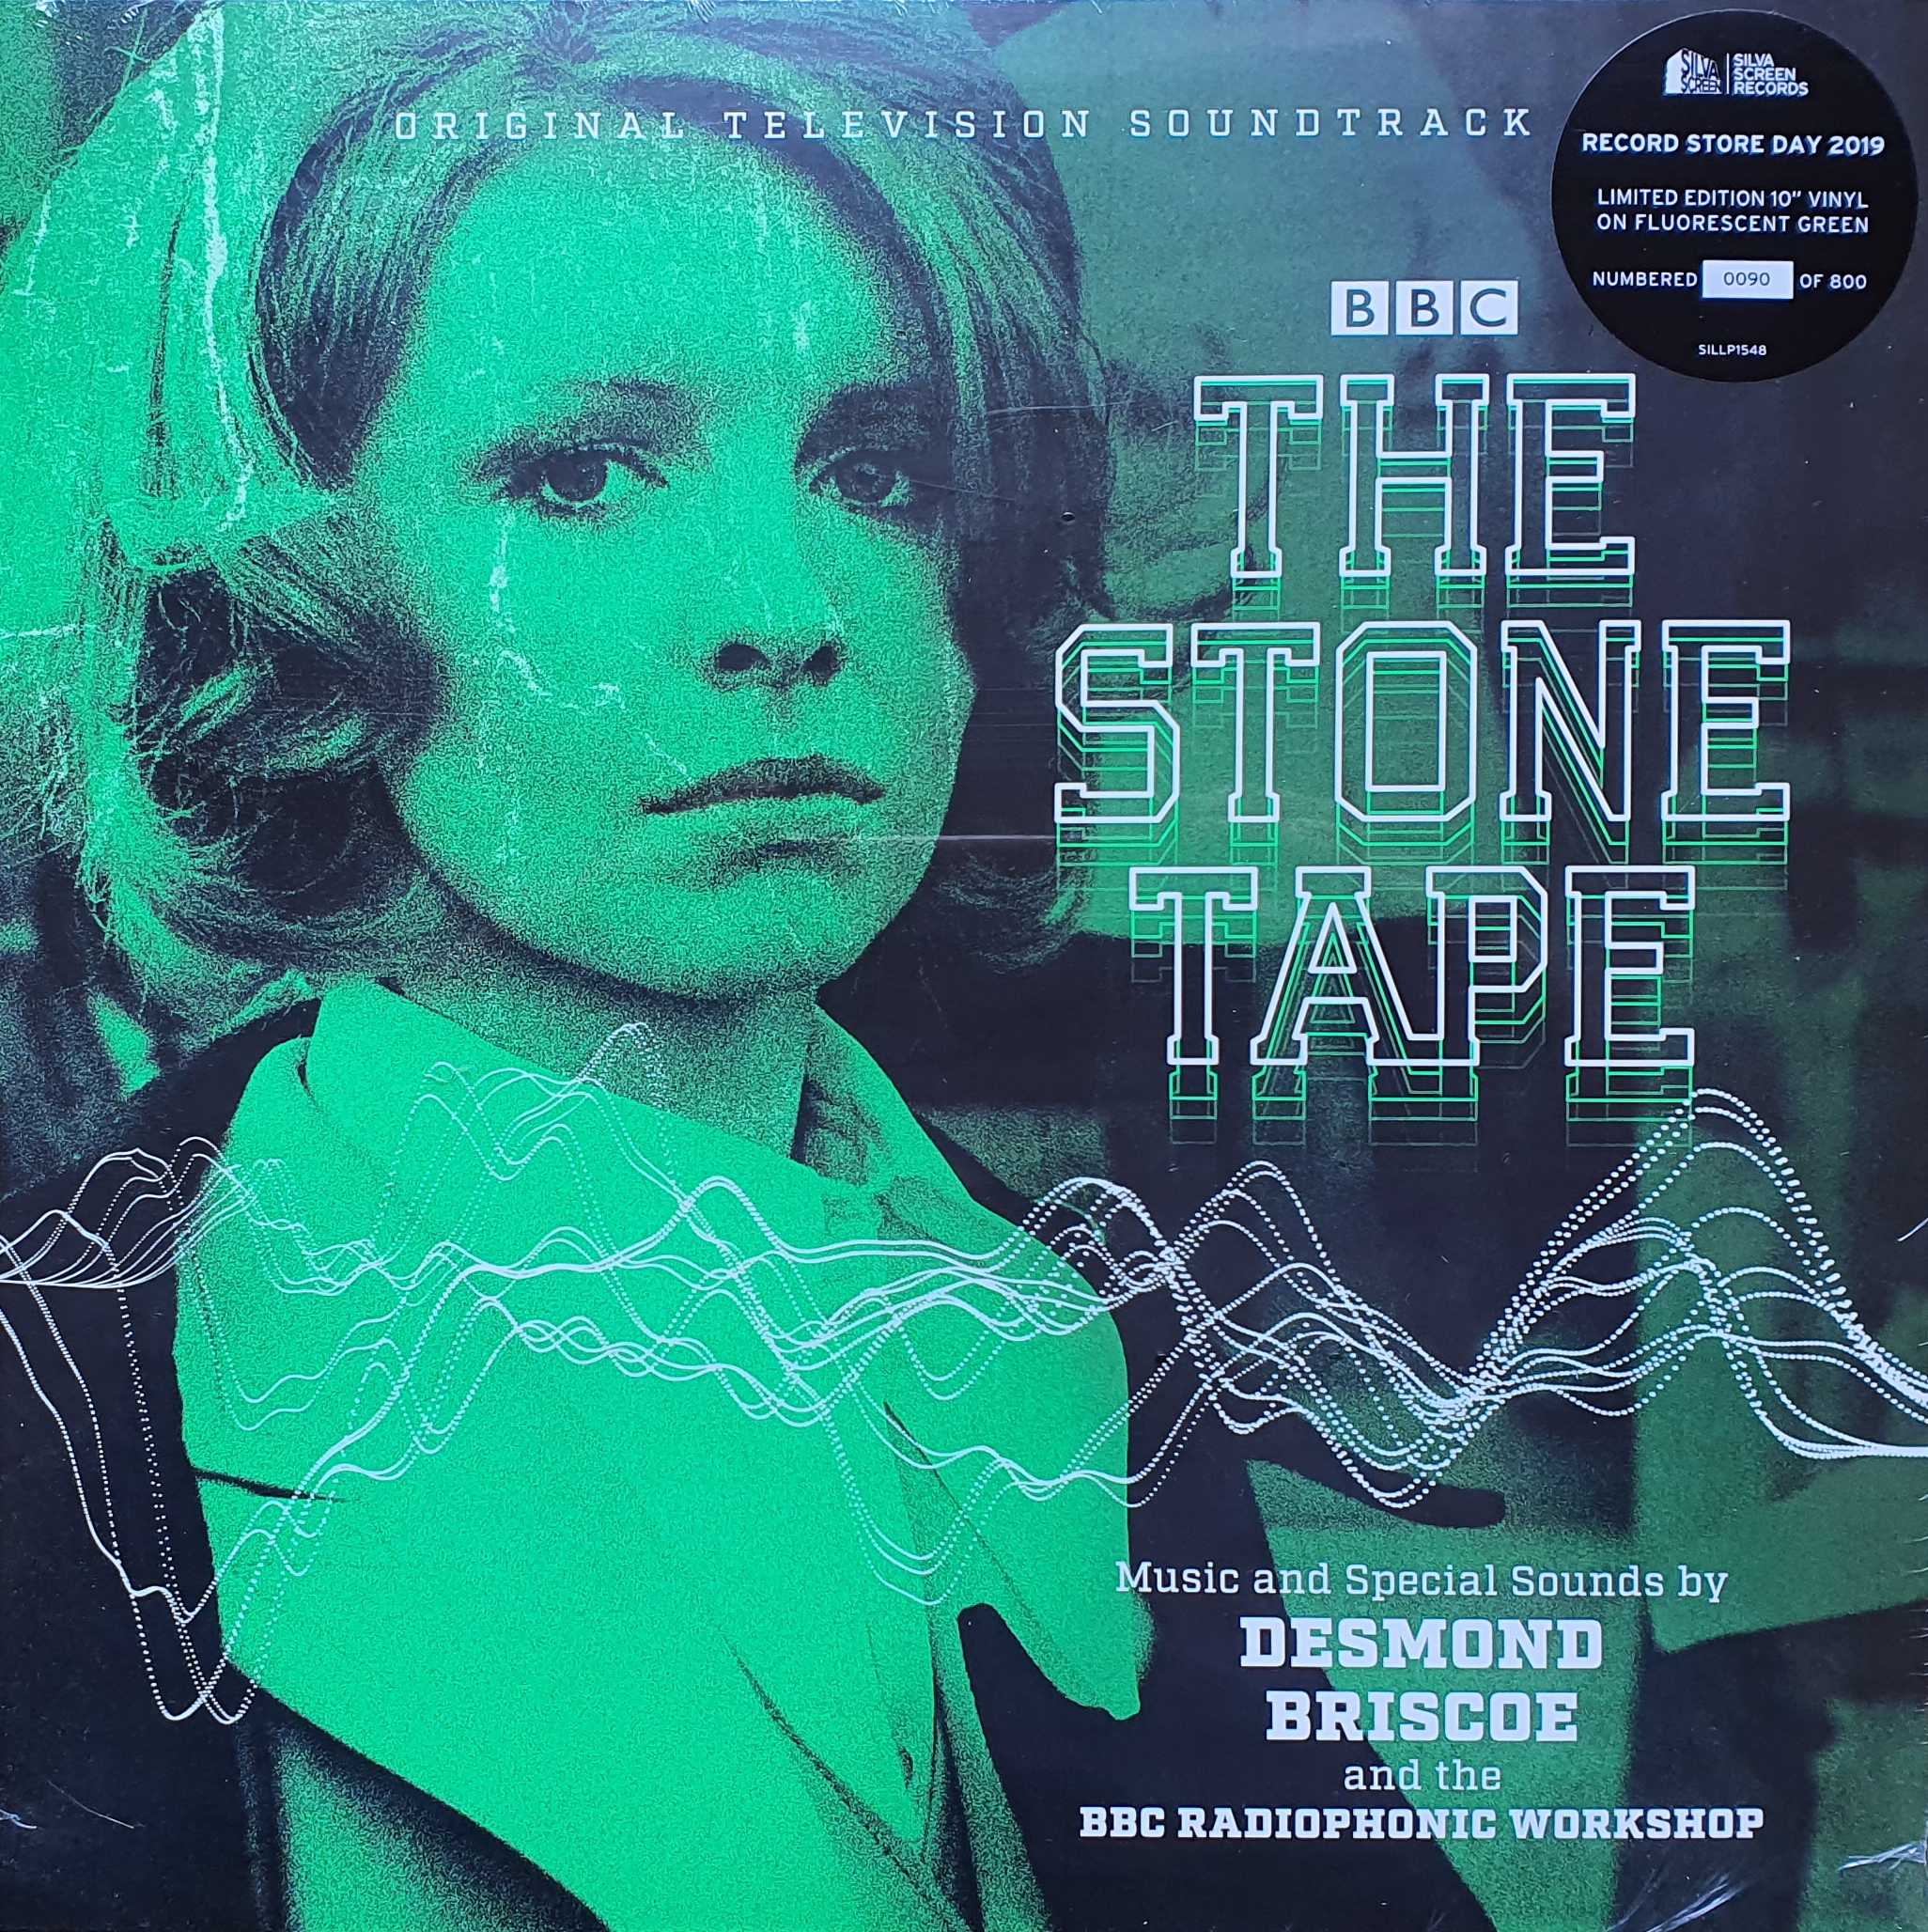 Picture of The Stone Tape (Record Store Day 2019) by artist Desmond Briscoe and the BBC Radiophonic Workshop from the BBC 10inches - Records and Tapes library